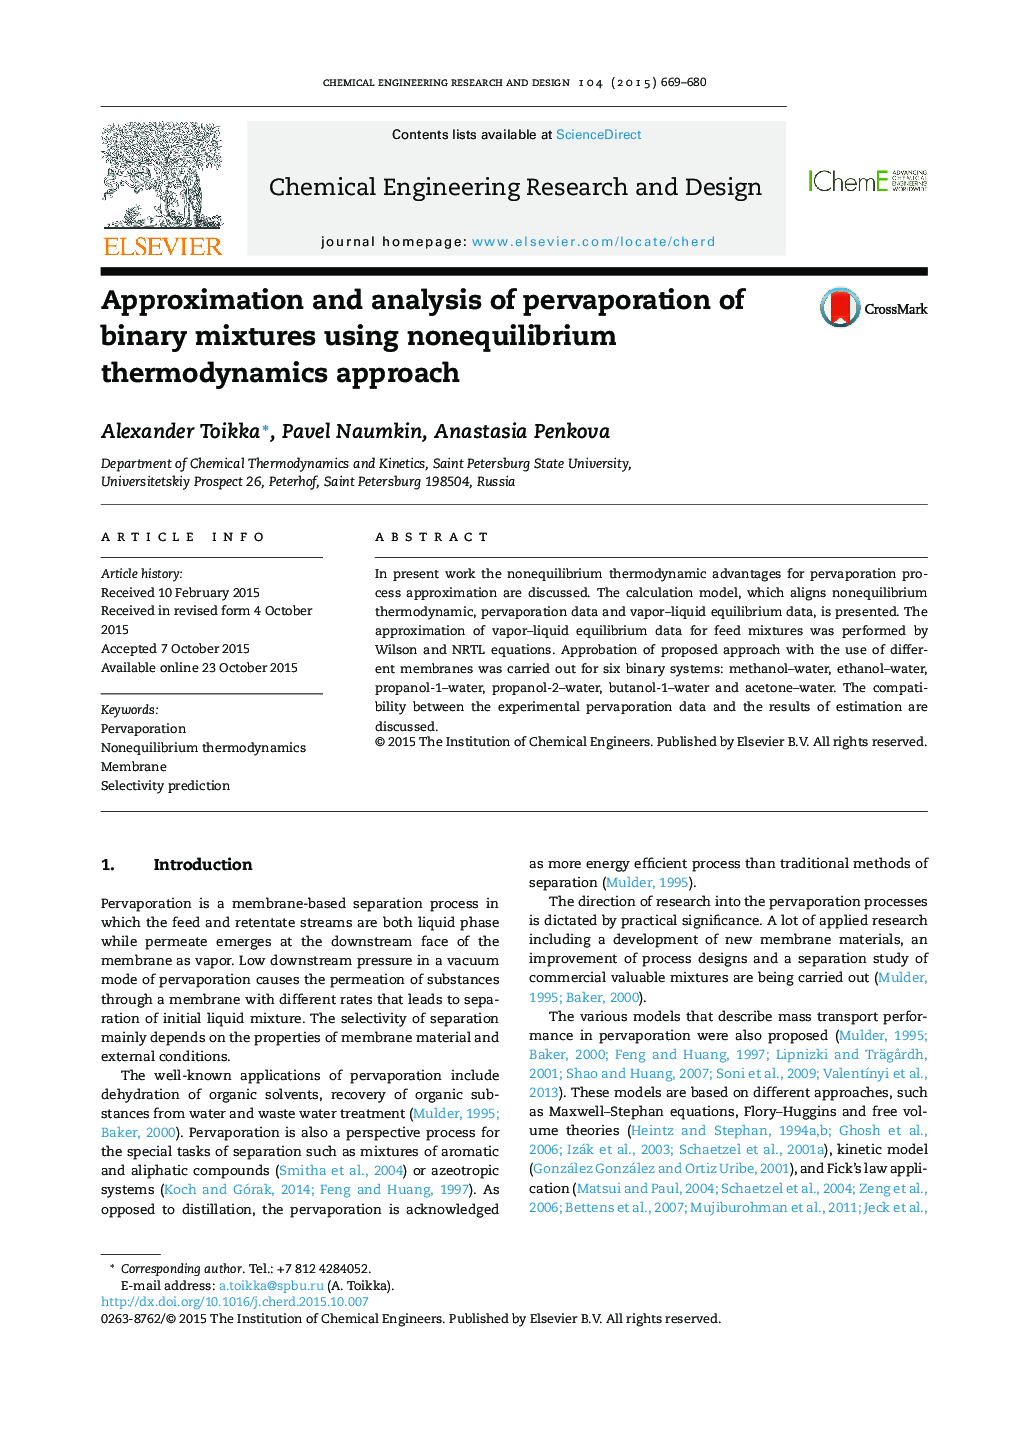 Approximation and analysis of pervaporation of binary mixtures using nonequilibrium thermodynamics approach